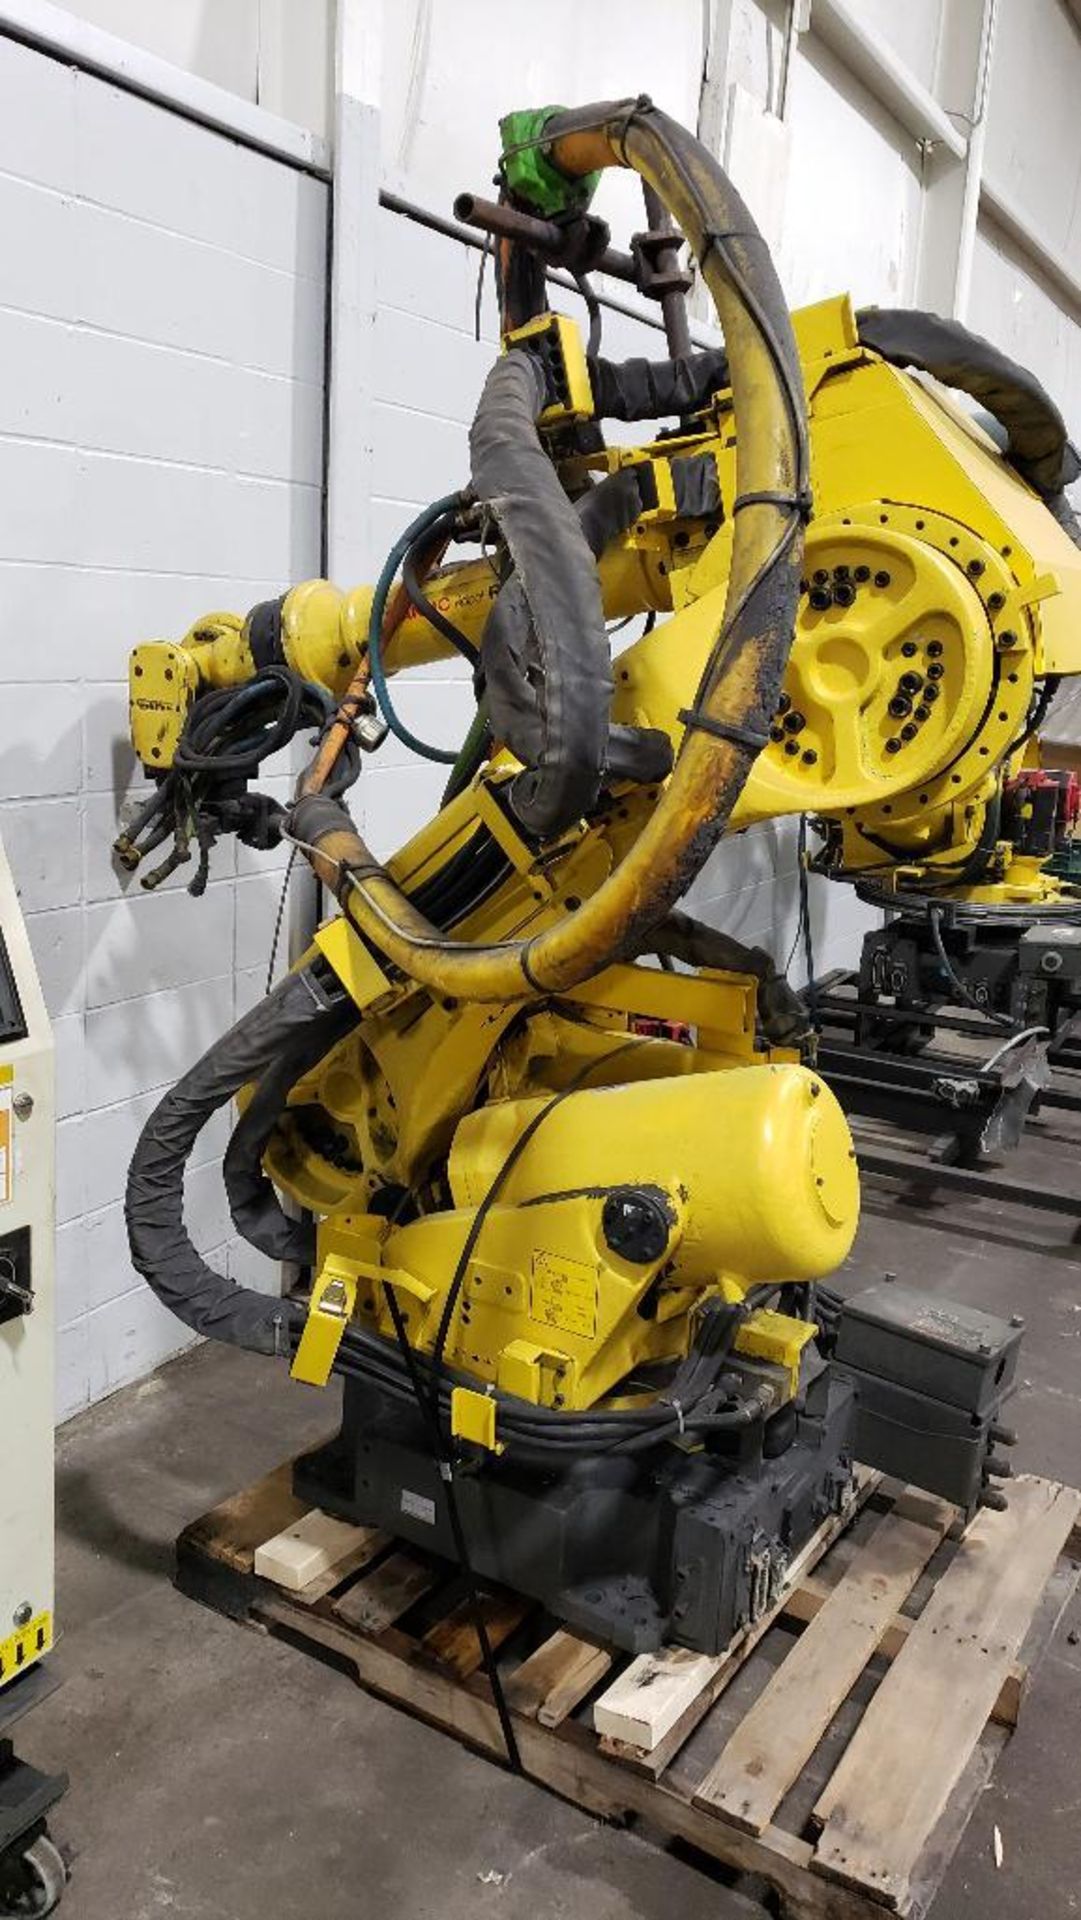 Fanuc R-2000iA/165F robot with Fanuc System R-J3iB controller. - Image 2 of 13